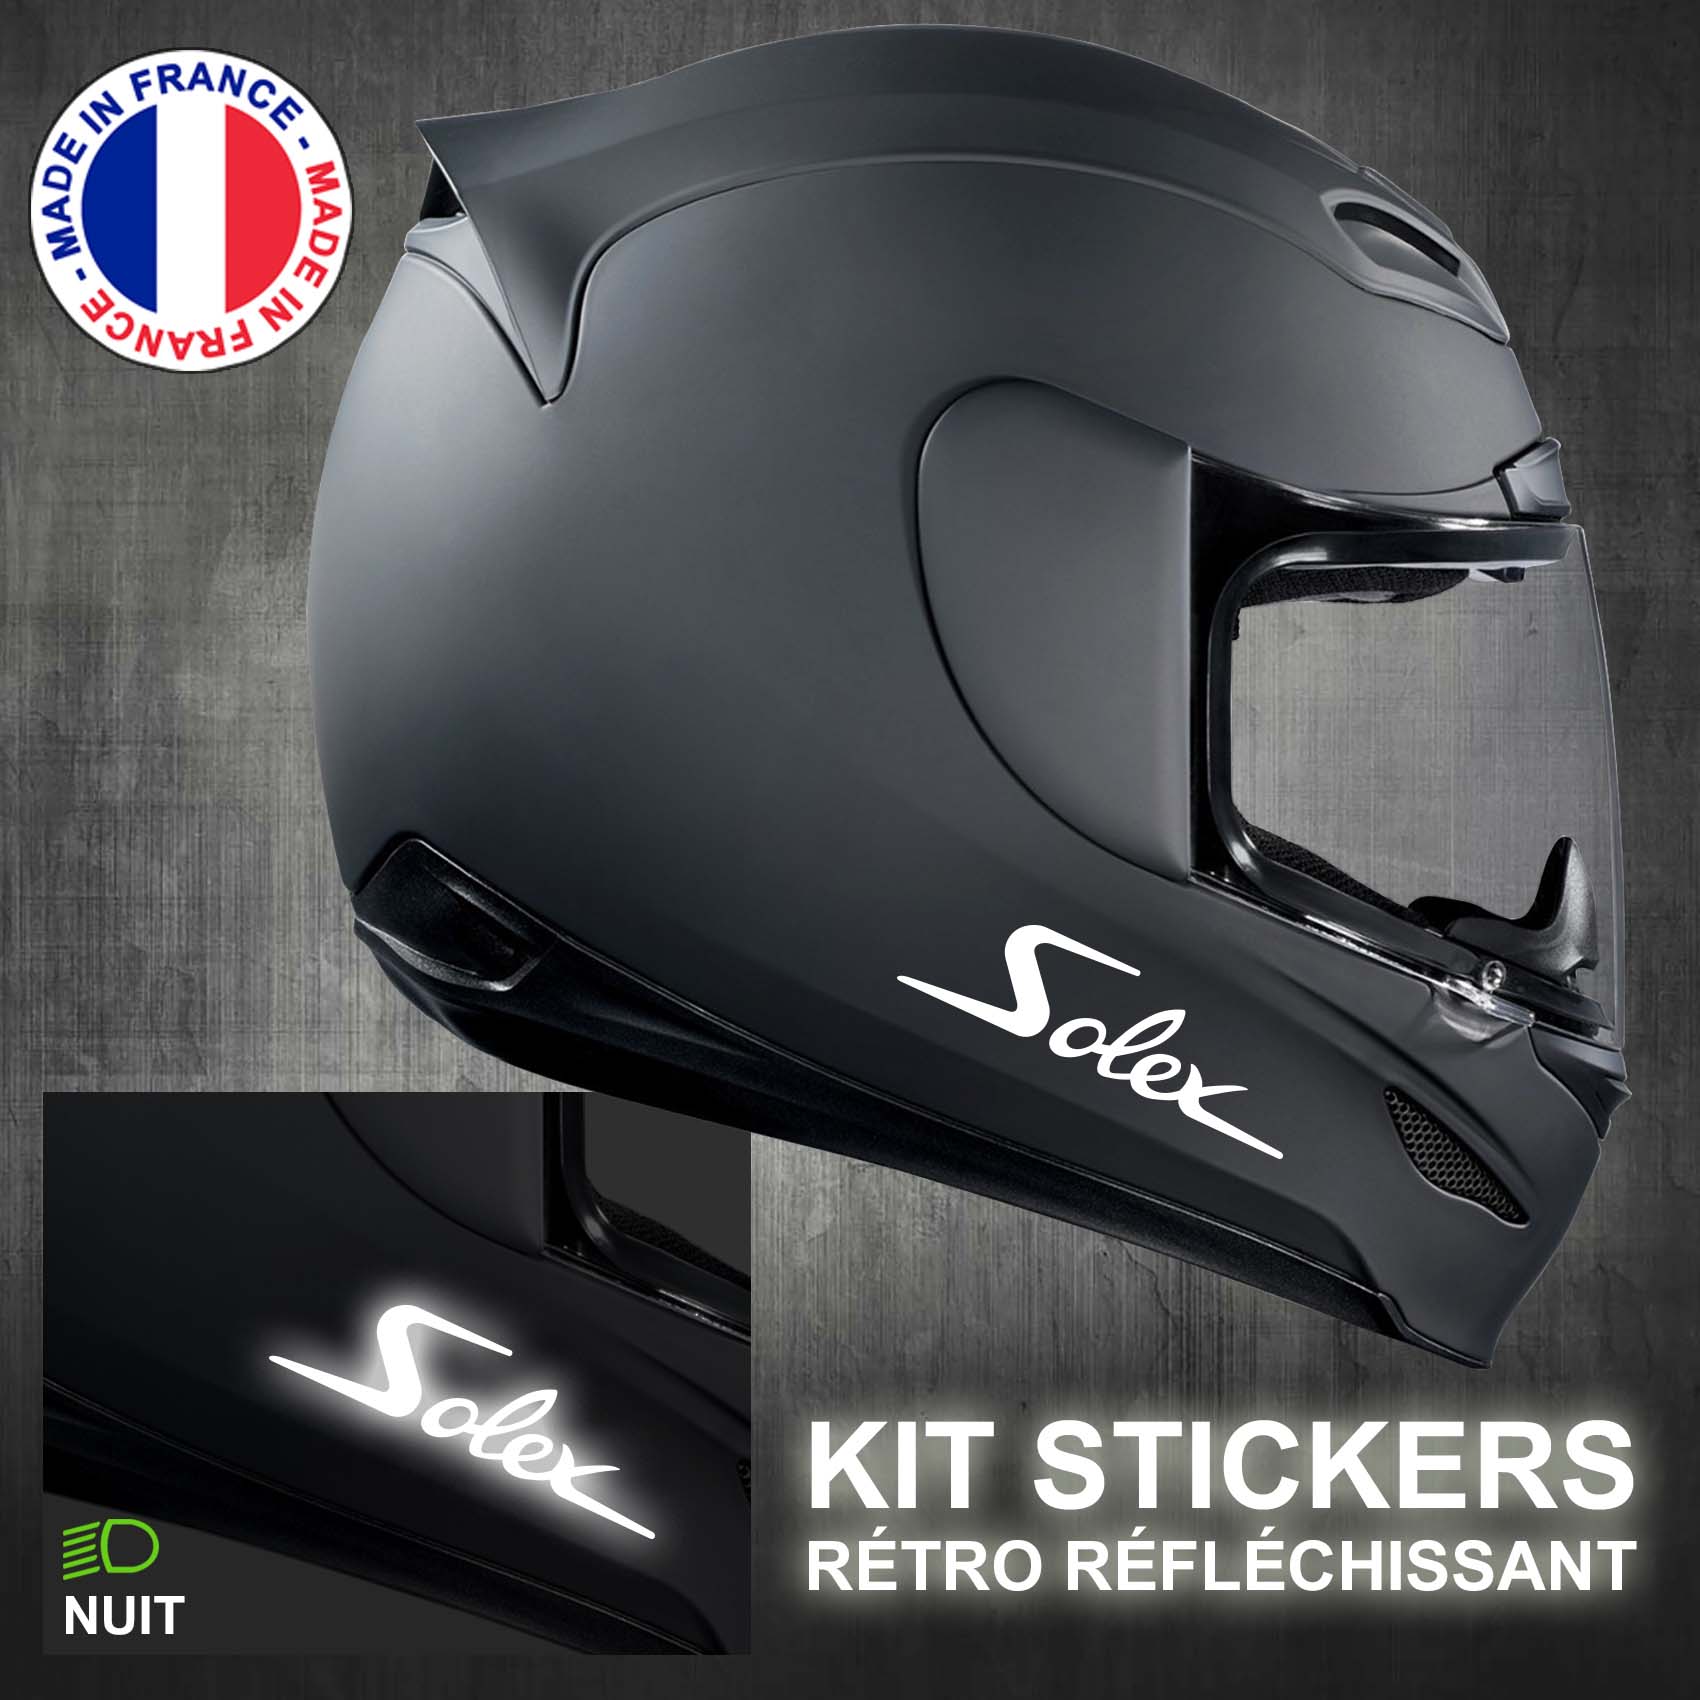 stickers-casque-moto-solex-ref1-retro-reflechissant-autocollant-noir-moto-velo-tuning-racing-route-sticker-casques-adhesif-scooter-nuit-securite-decals-personnalise-personnalisable-min